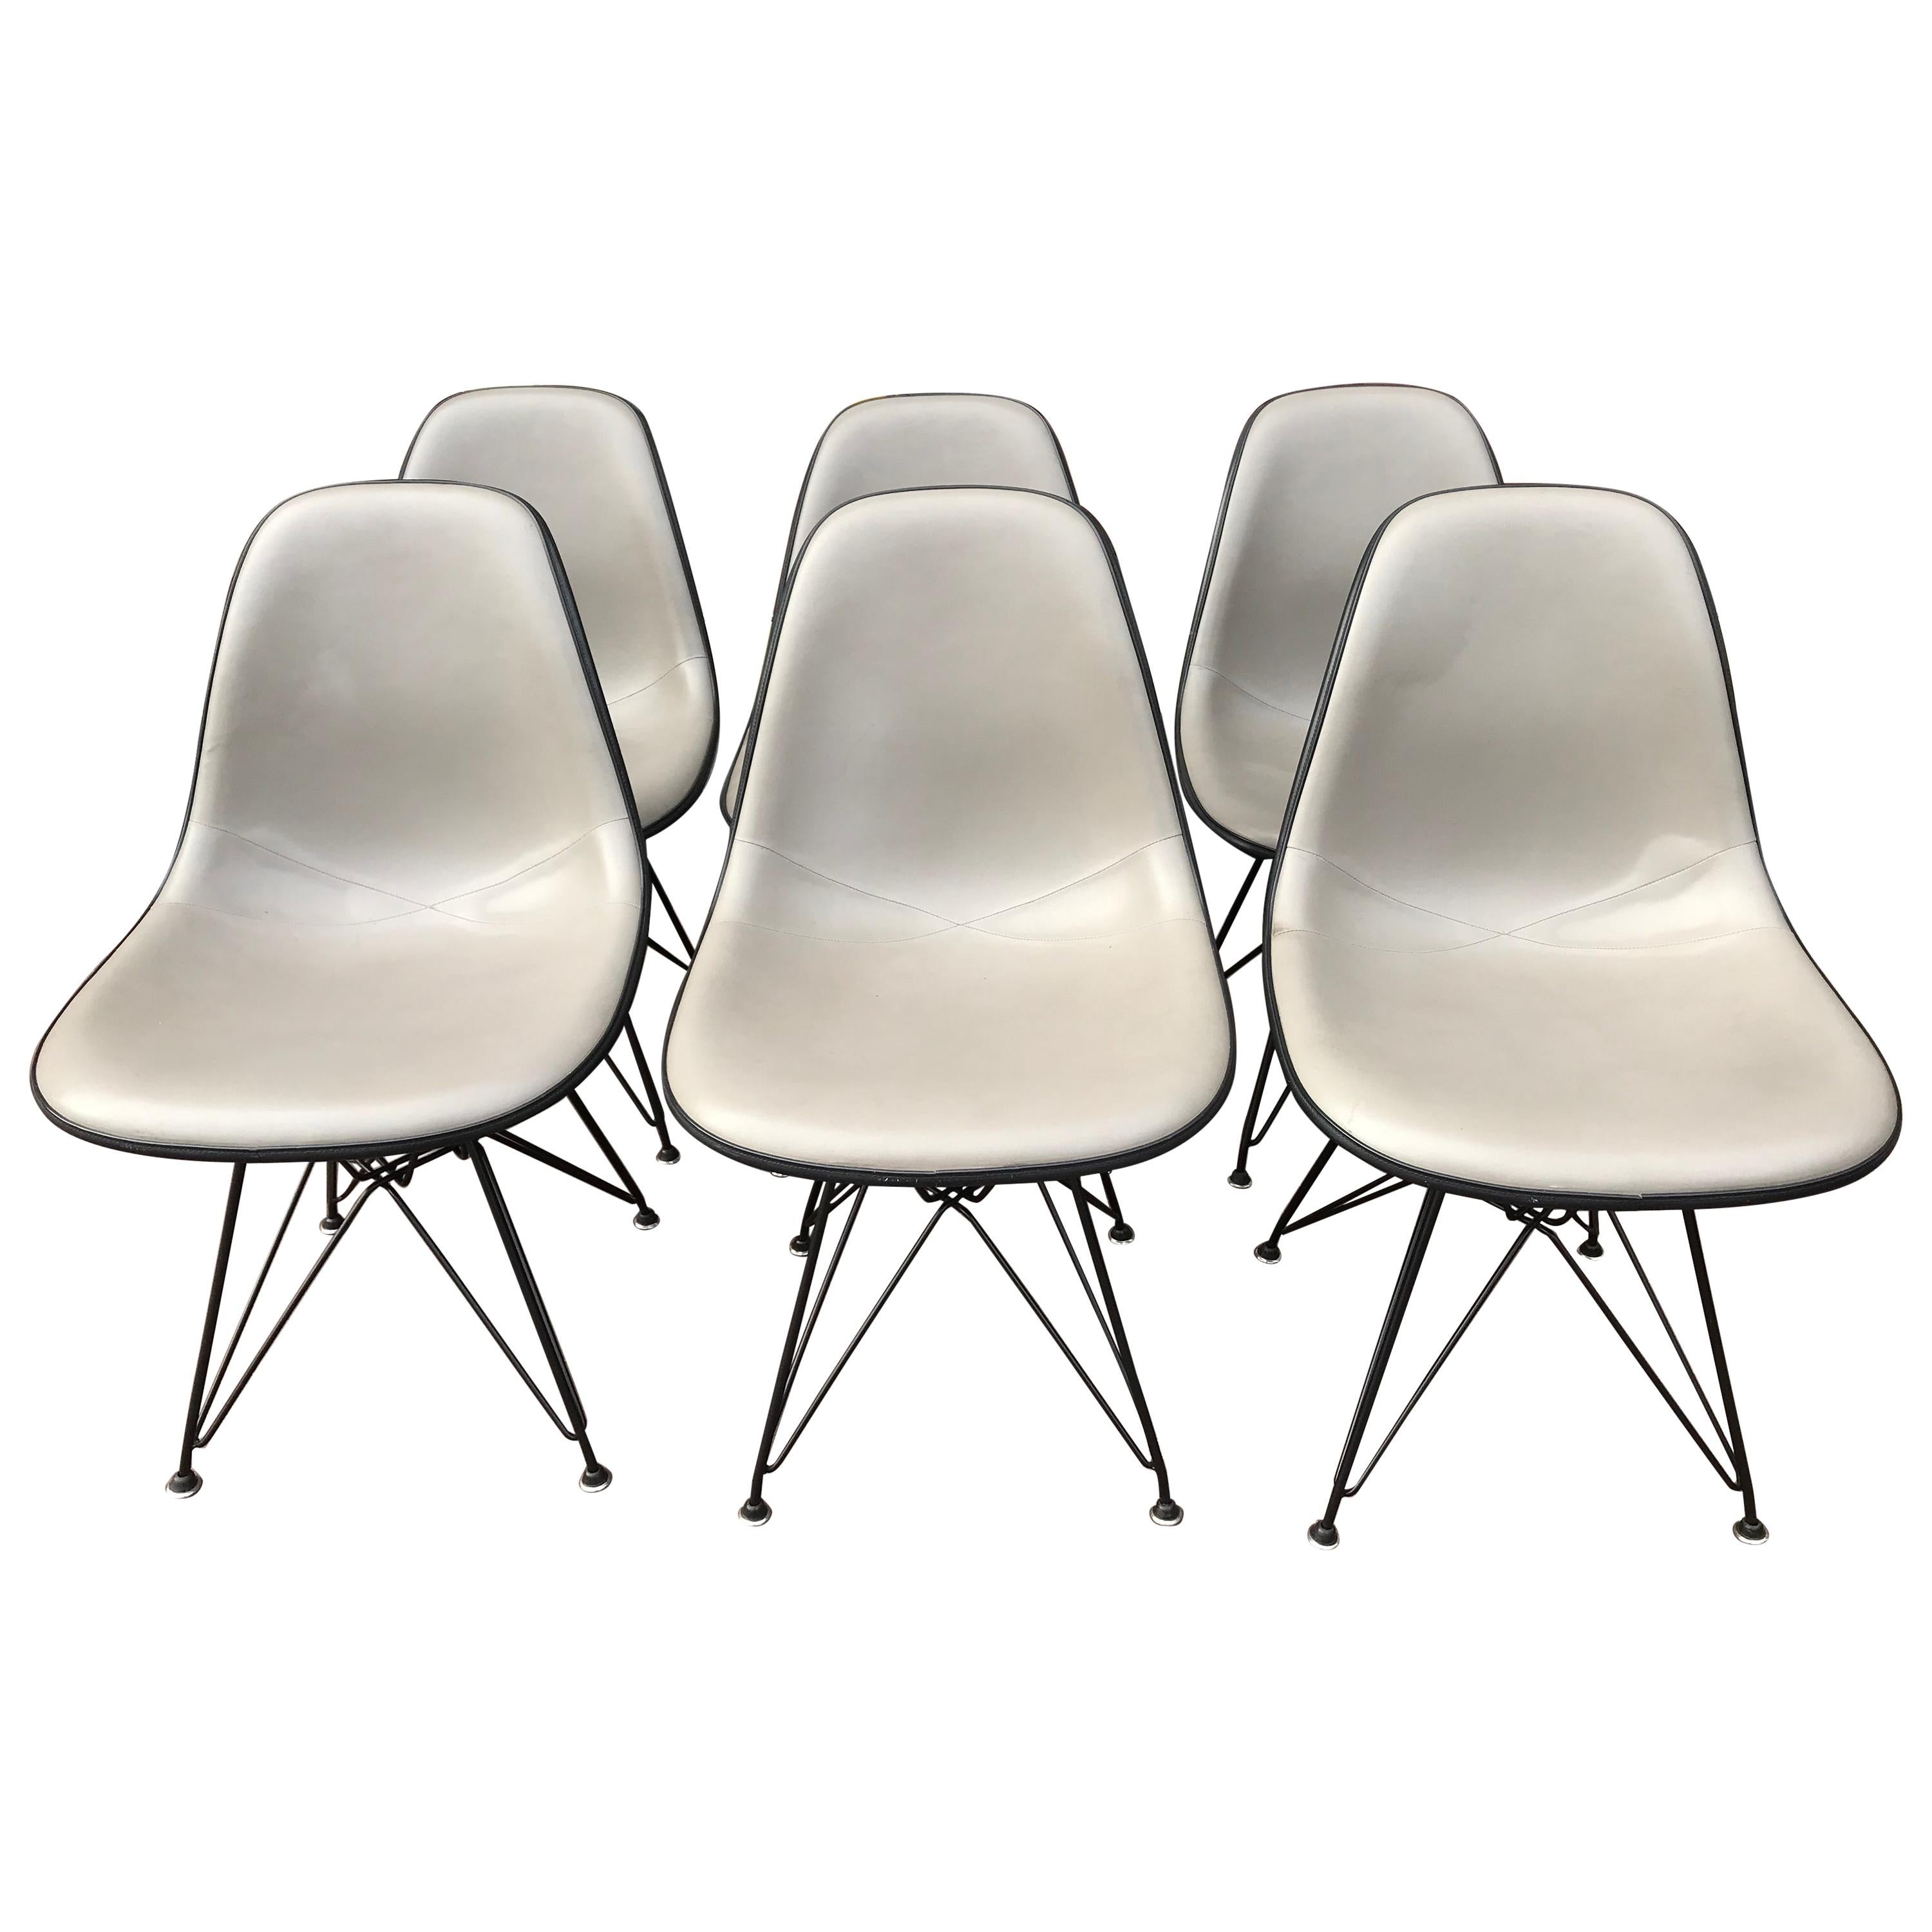 Charles Eames, Set of 6 Chairs DSW, Leather Grey Version, circa 1970